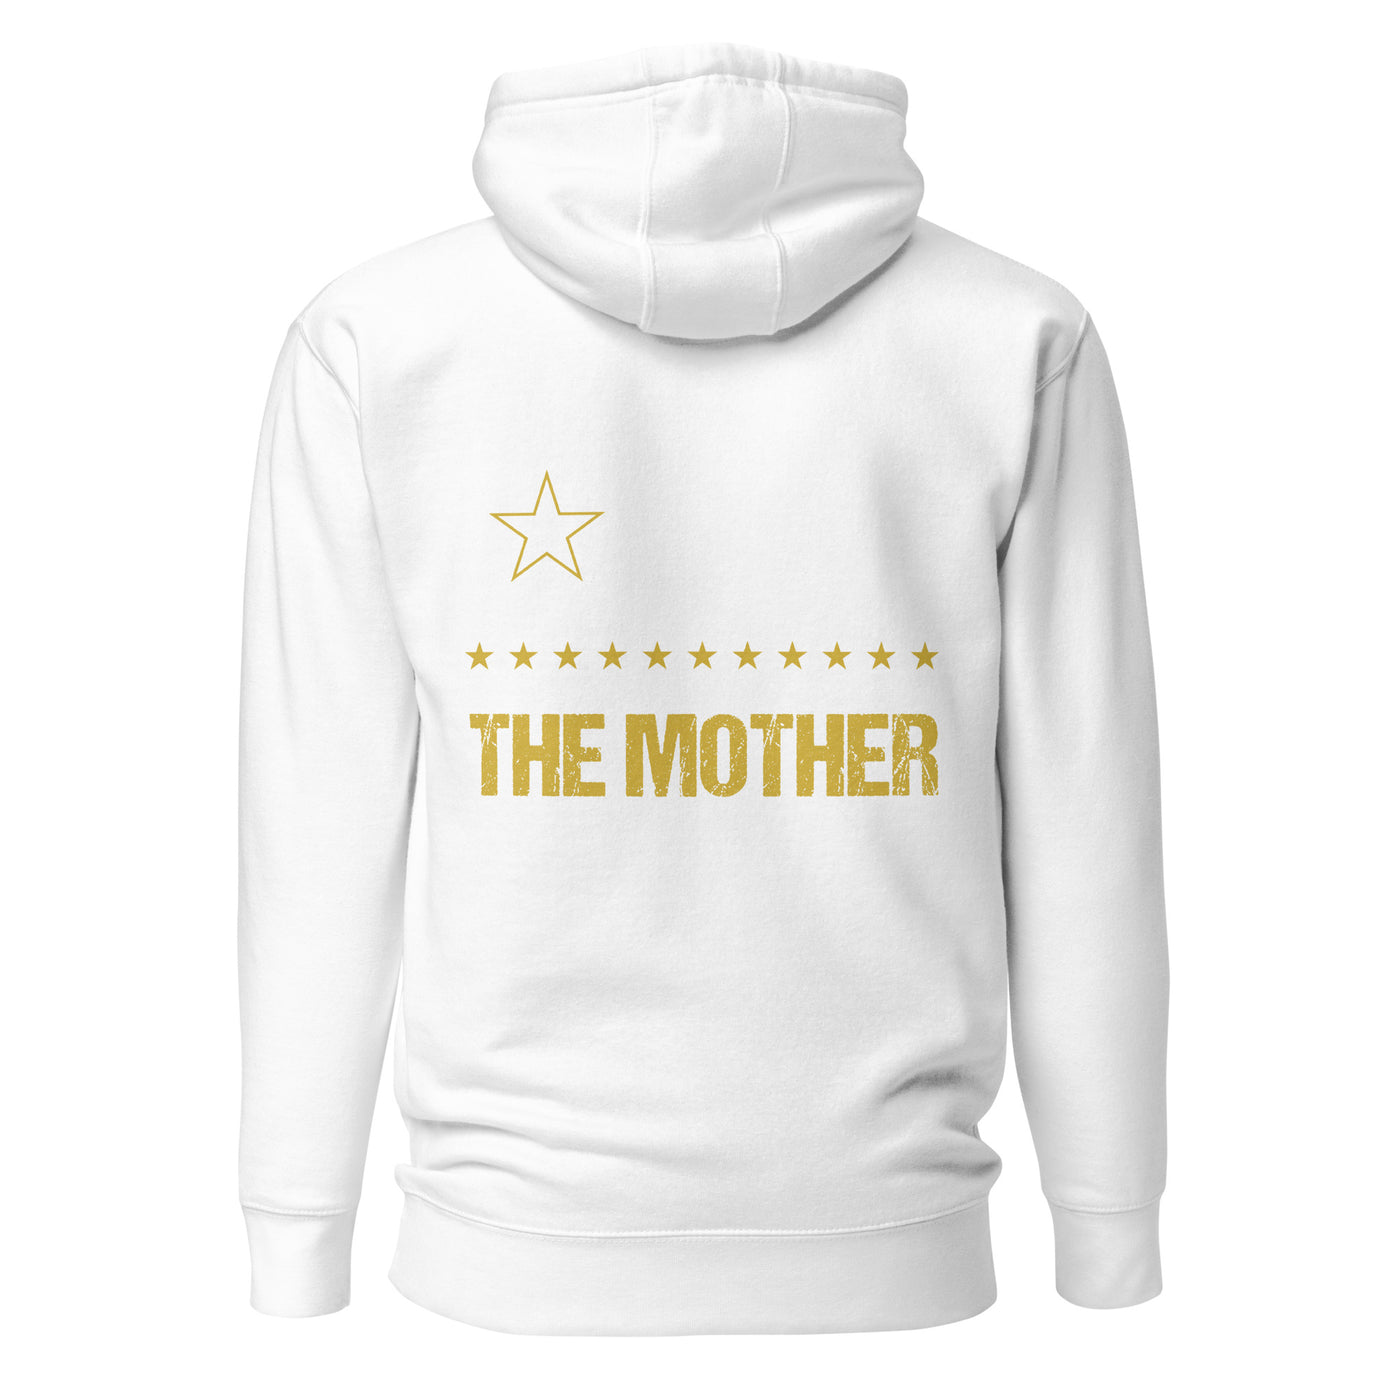 The few, the proud, the Mother - Unisex Hoodie ( Back Print )